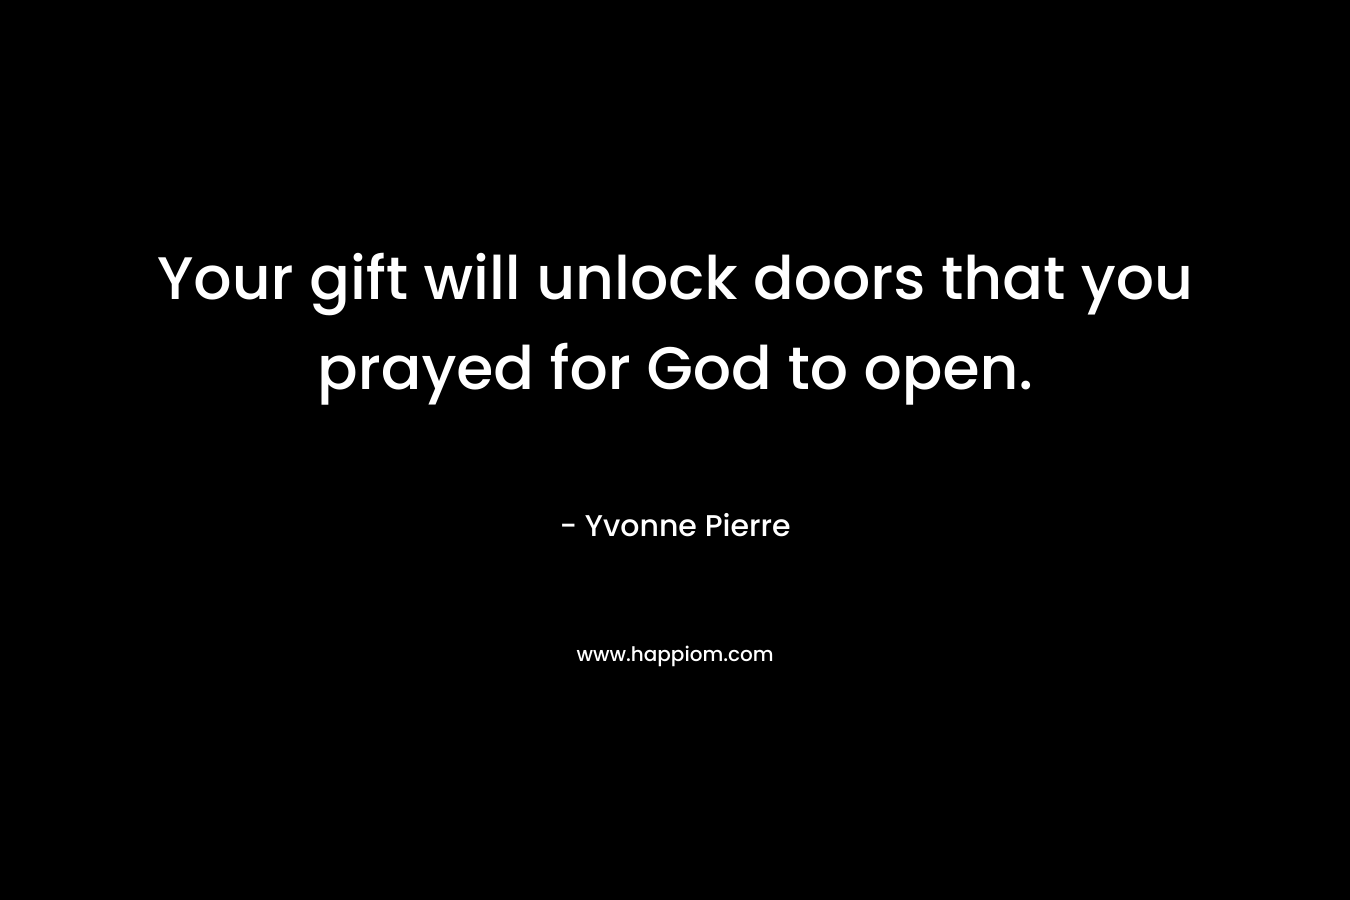 Your gift will unlock doors that you prayed for God to open.